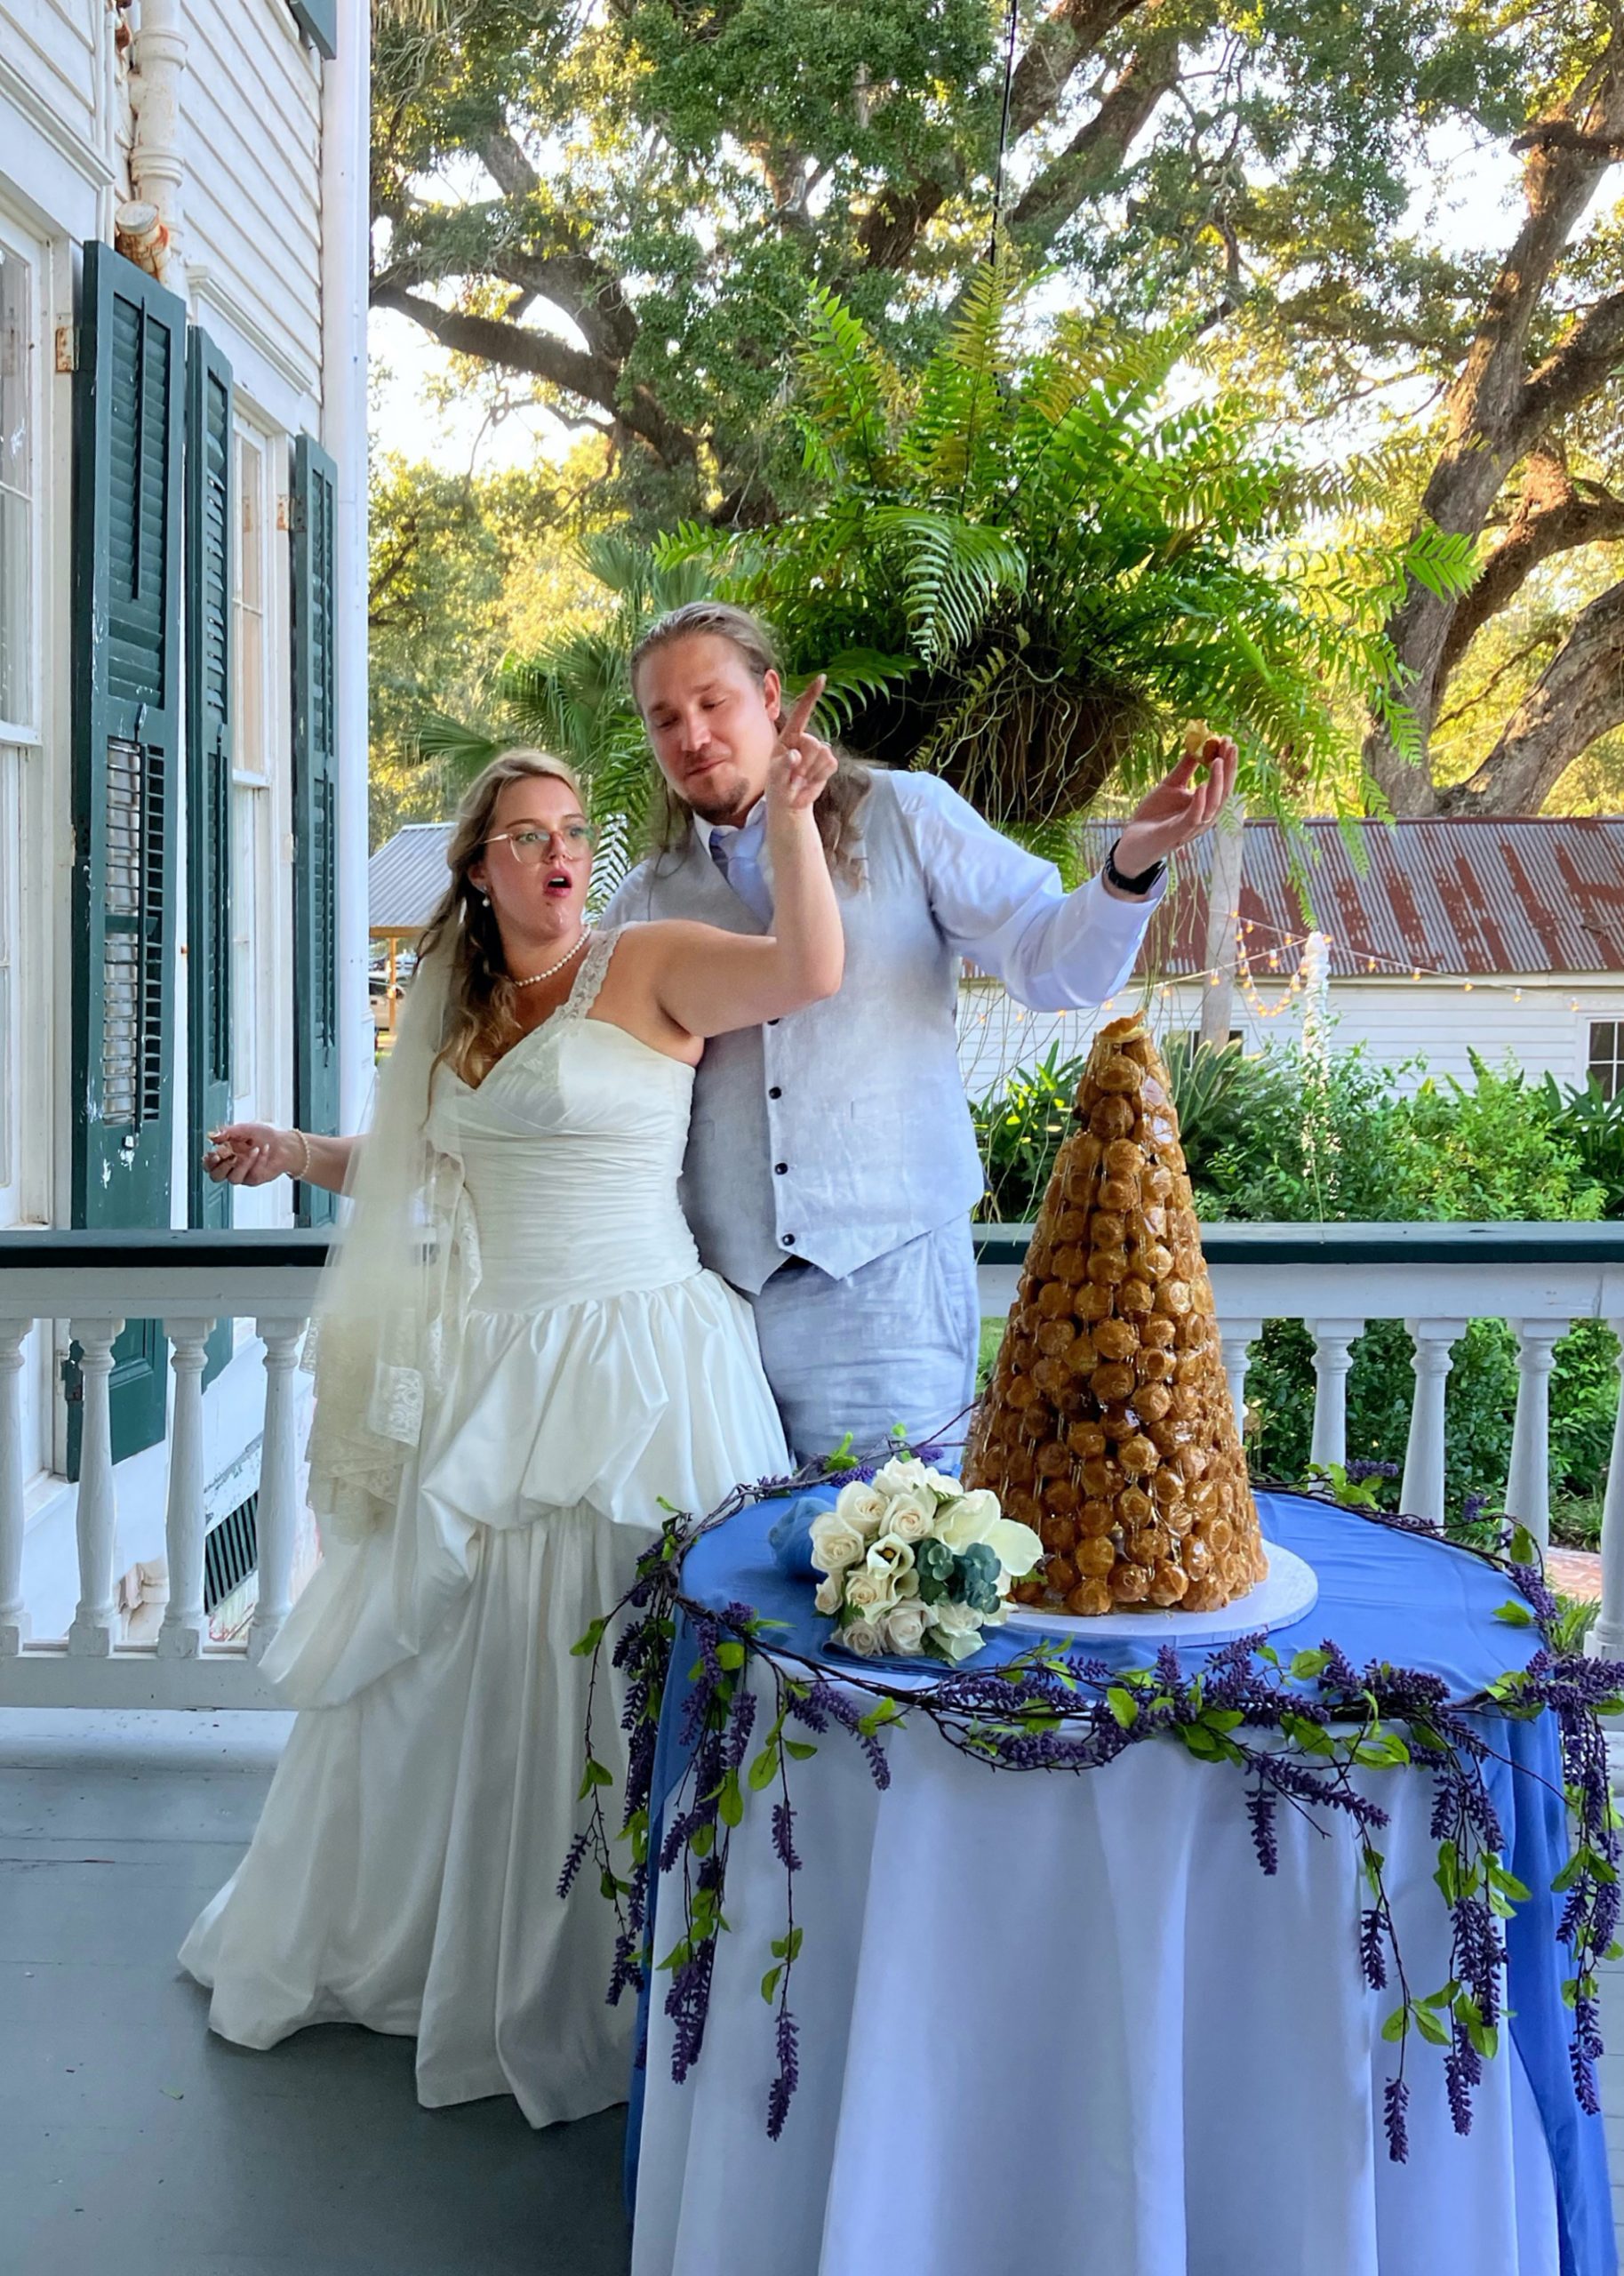 Sélène Allain-Kovacs wed Mitch Marcello at St. John the Evangelist Catholic Church, Jenerette, Louisiana, with a reception held nearby at Albania Mansion, where her great-grandfather had been caretaker. The traditional Bayou Croquembouche wedding cake was filled with whipped cream and pecans. The couple, who honeymooned in Puerto Rico, now reside in St. Mary’s Parish. Photo Courtesy of Barbara Kovacs